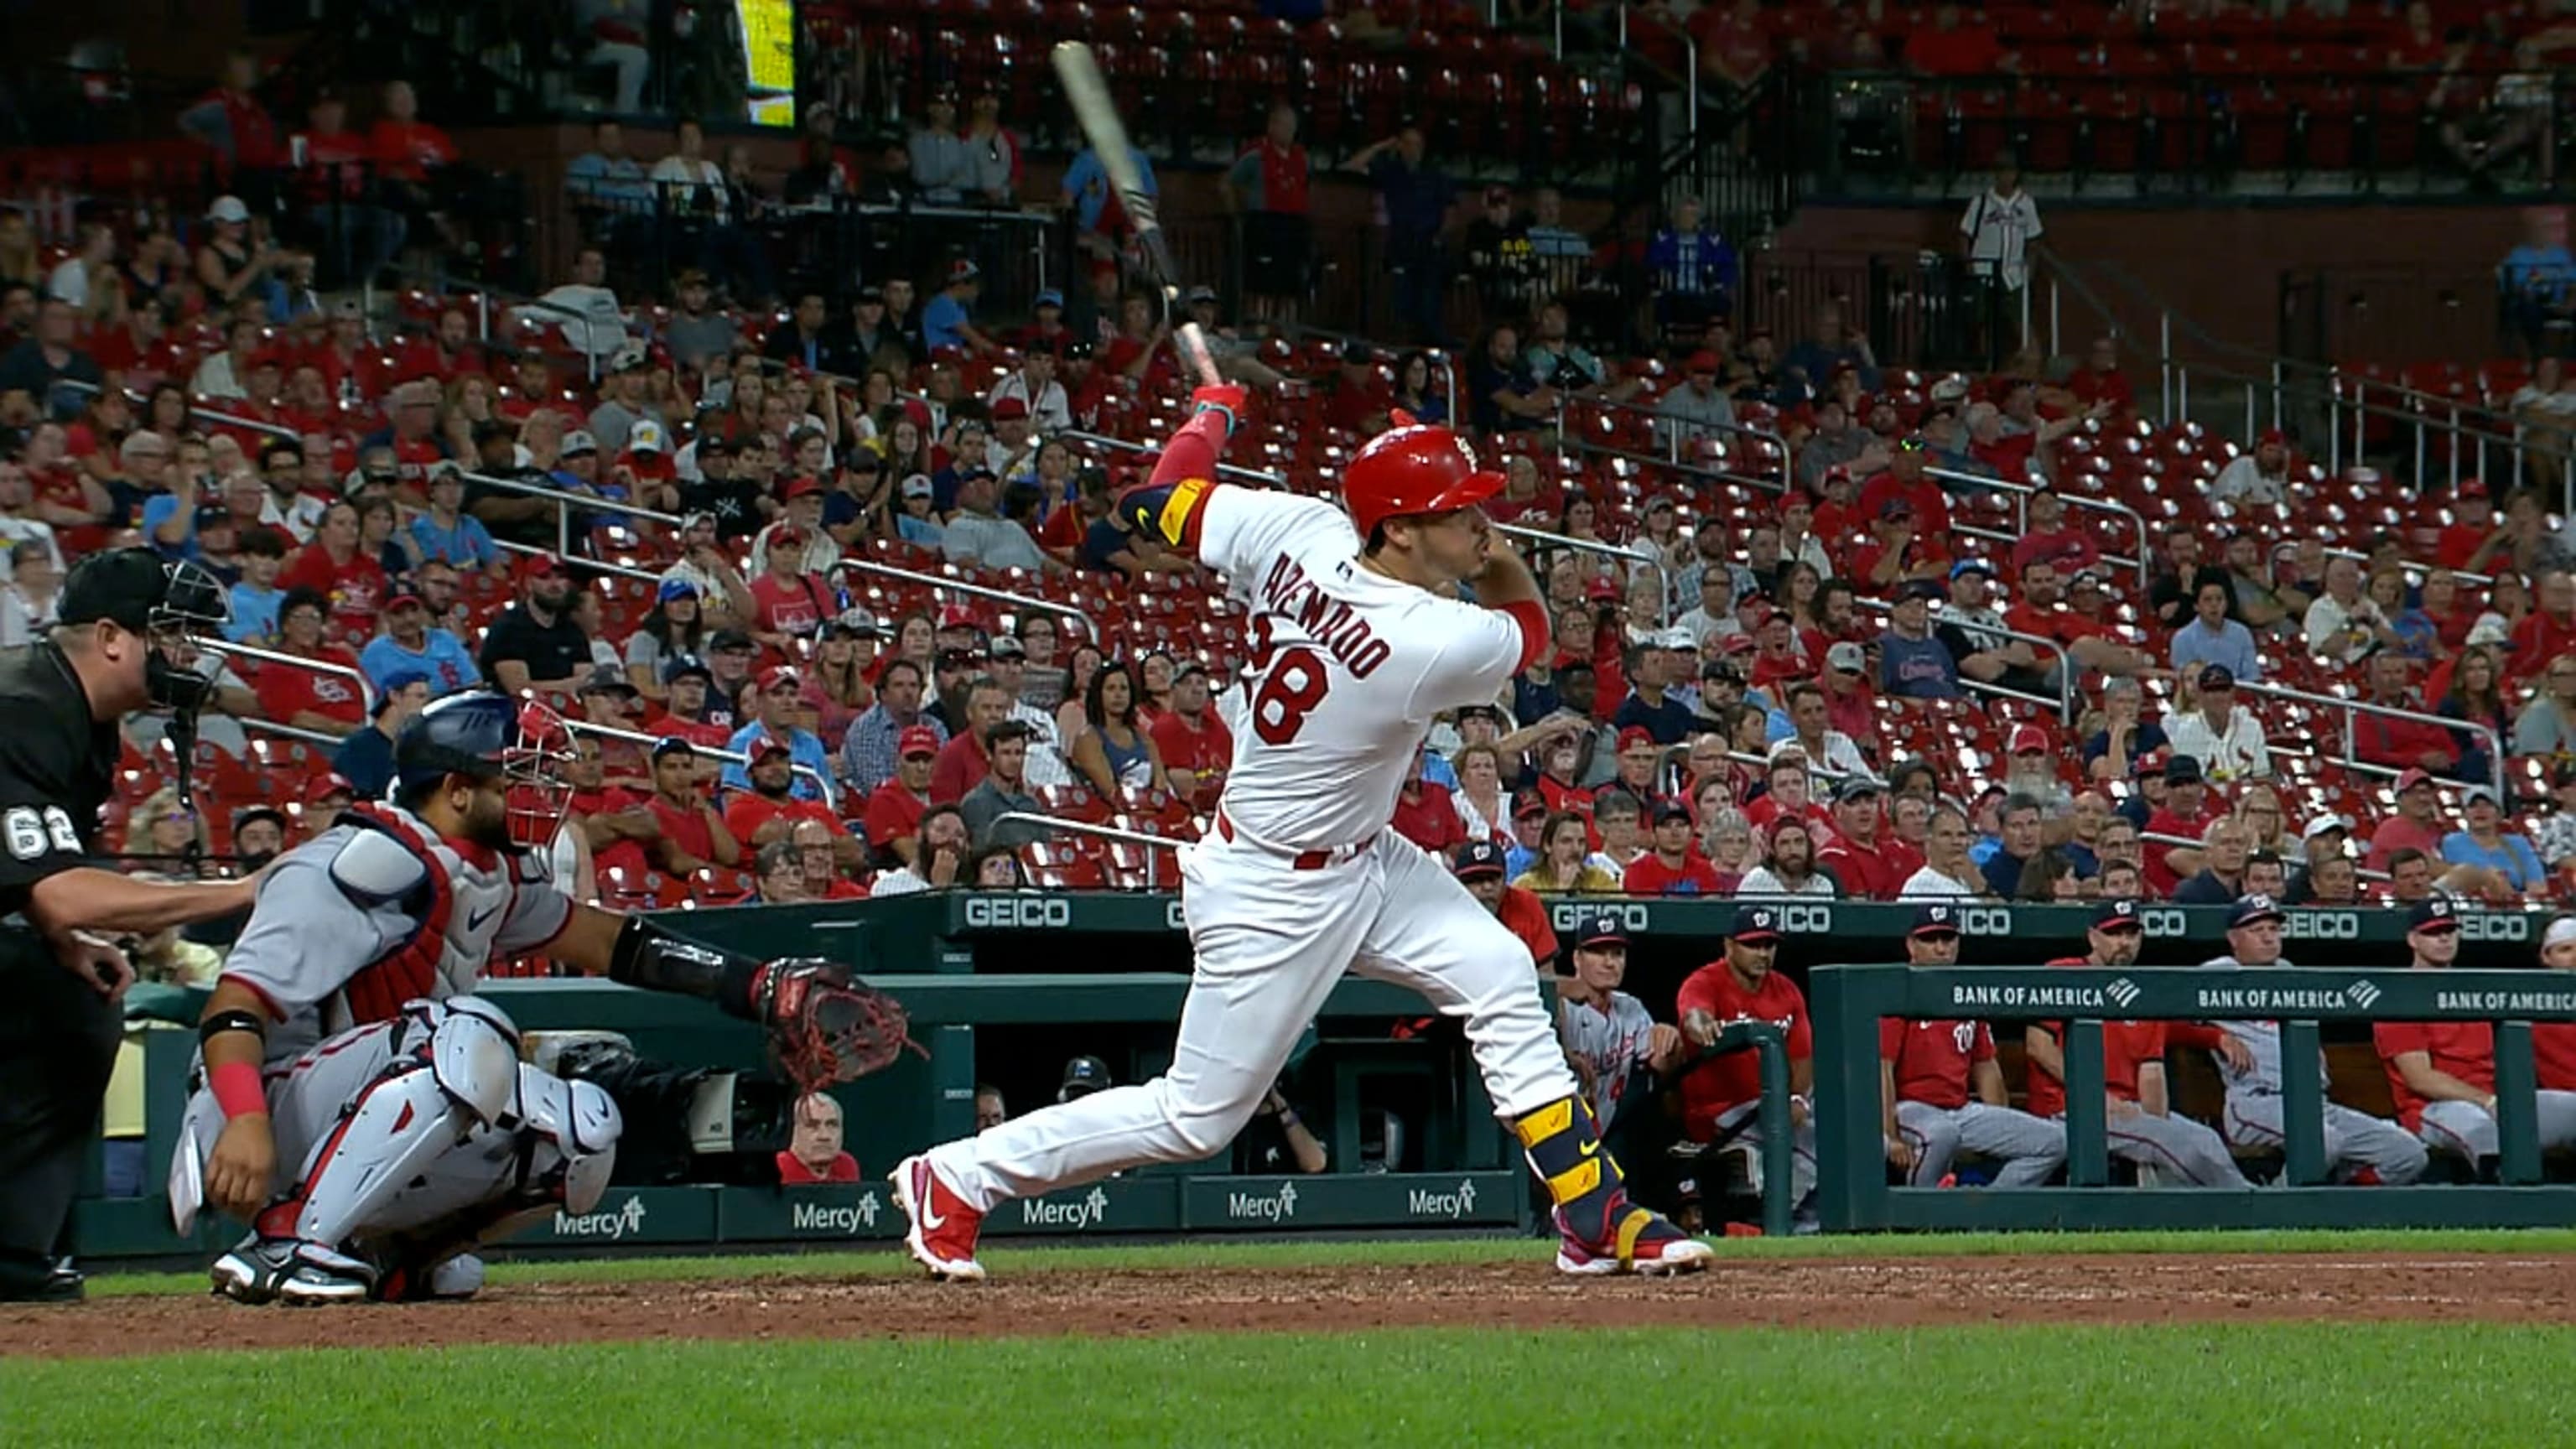 Cardinals rally to beat Padres, who remain oh-fer in extra innings